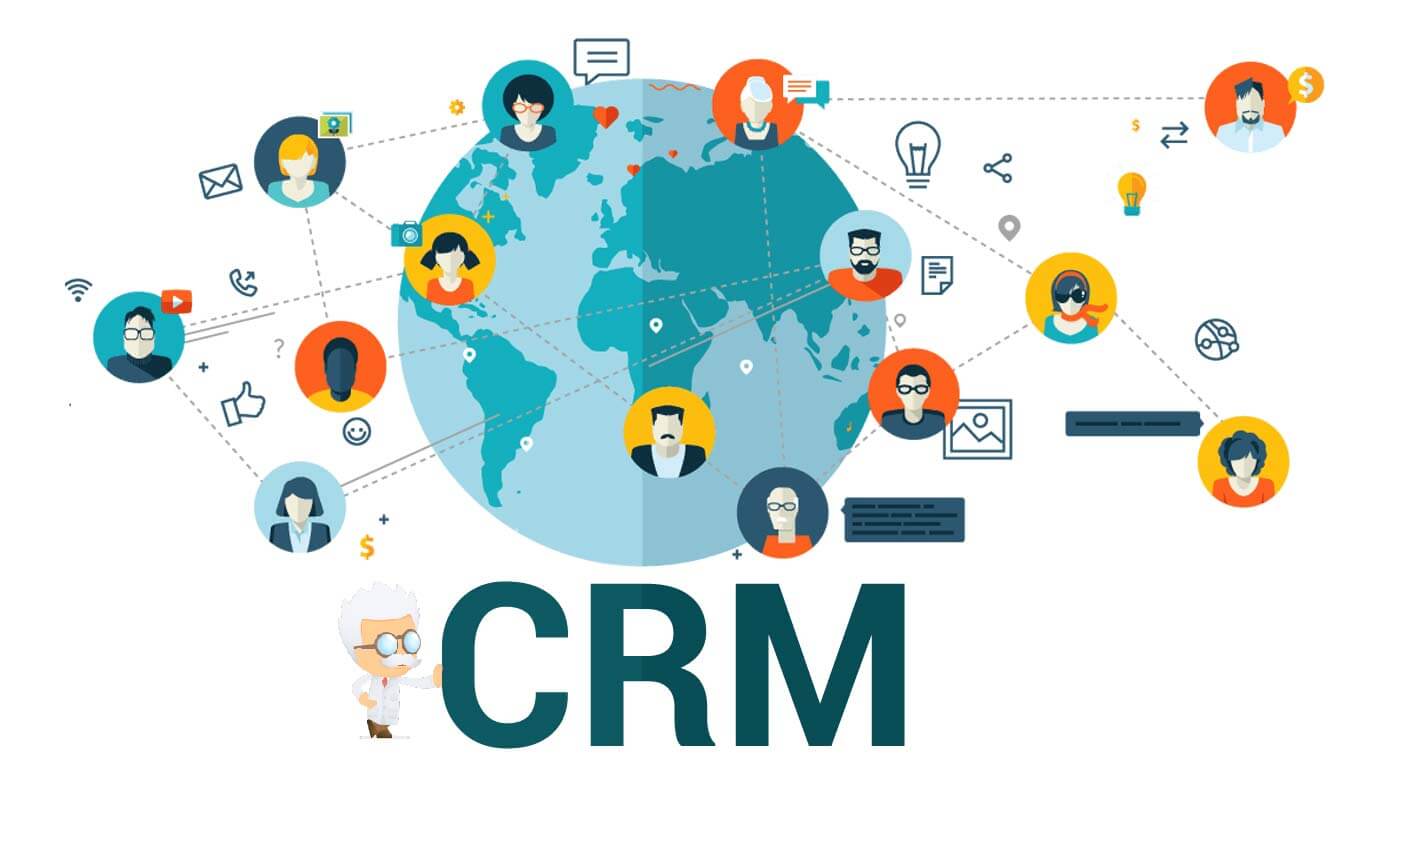 What’s a CRM?